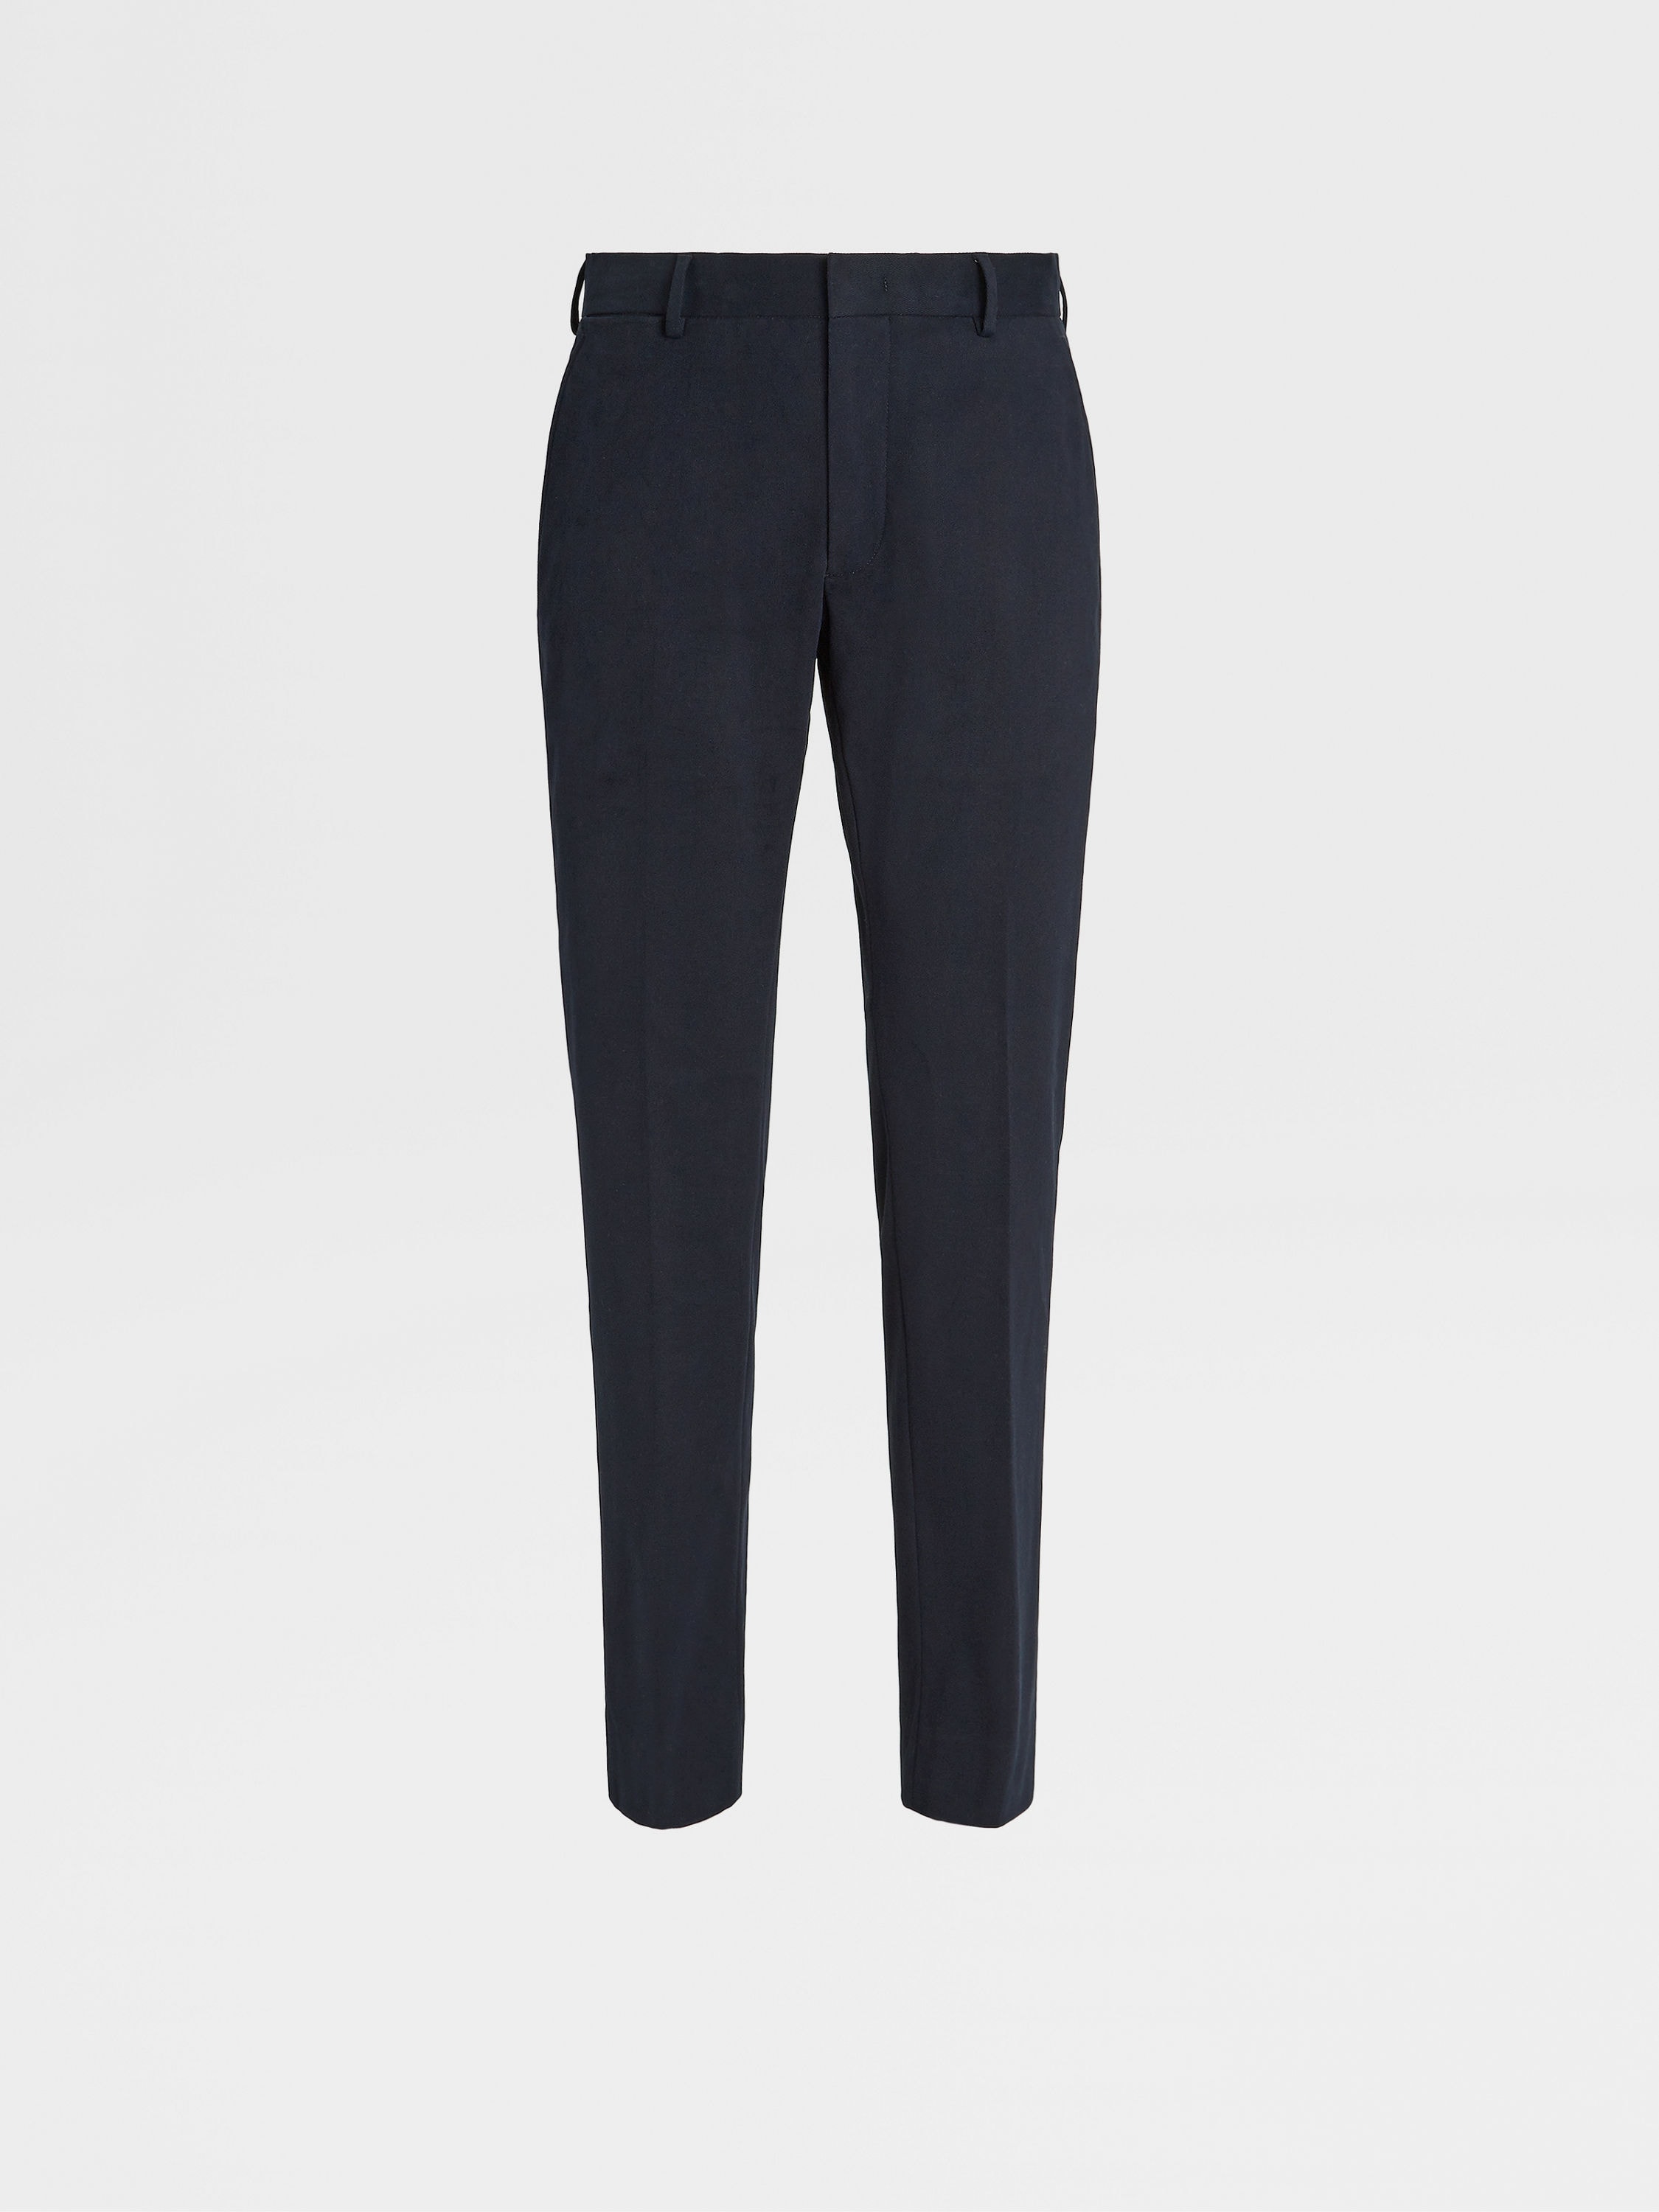 Navy Blue Winter Crossover Cotton Pants